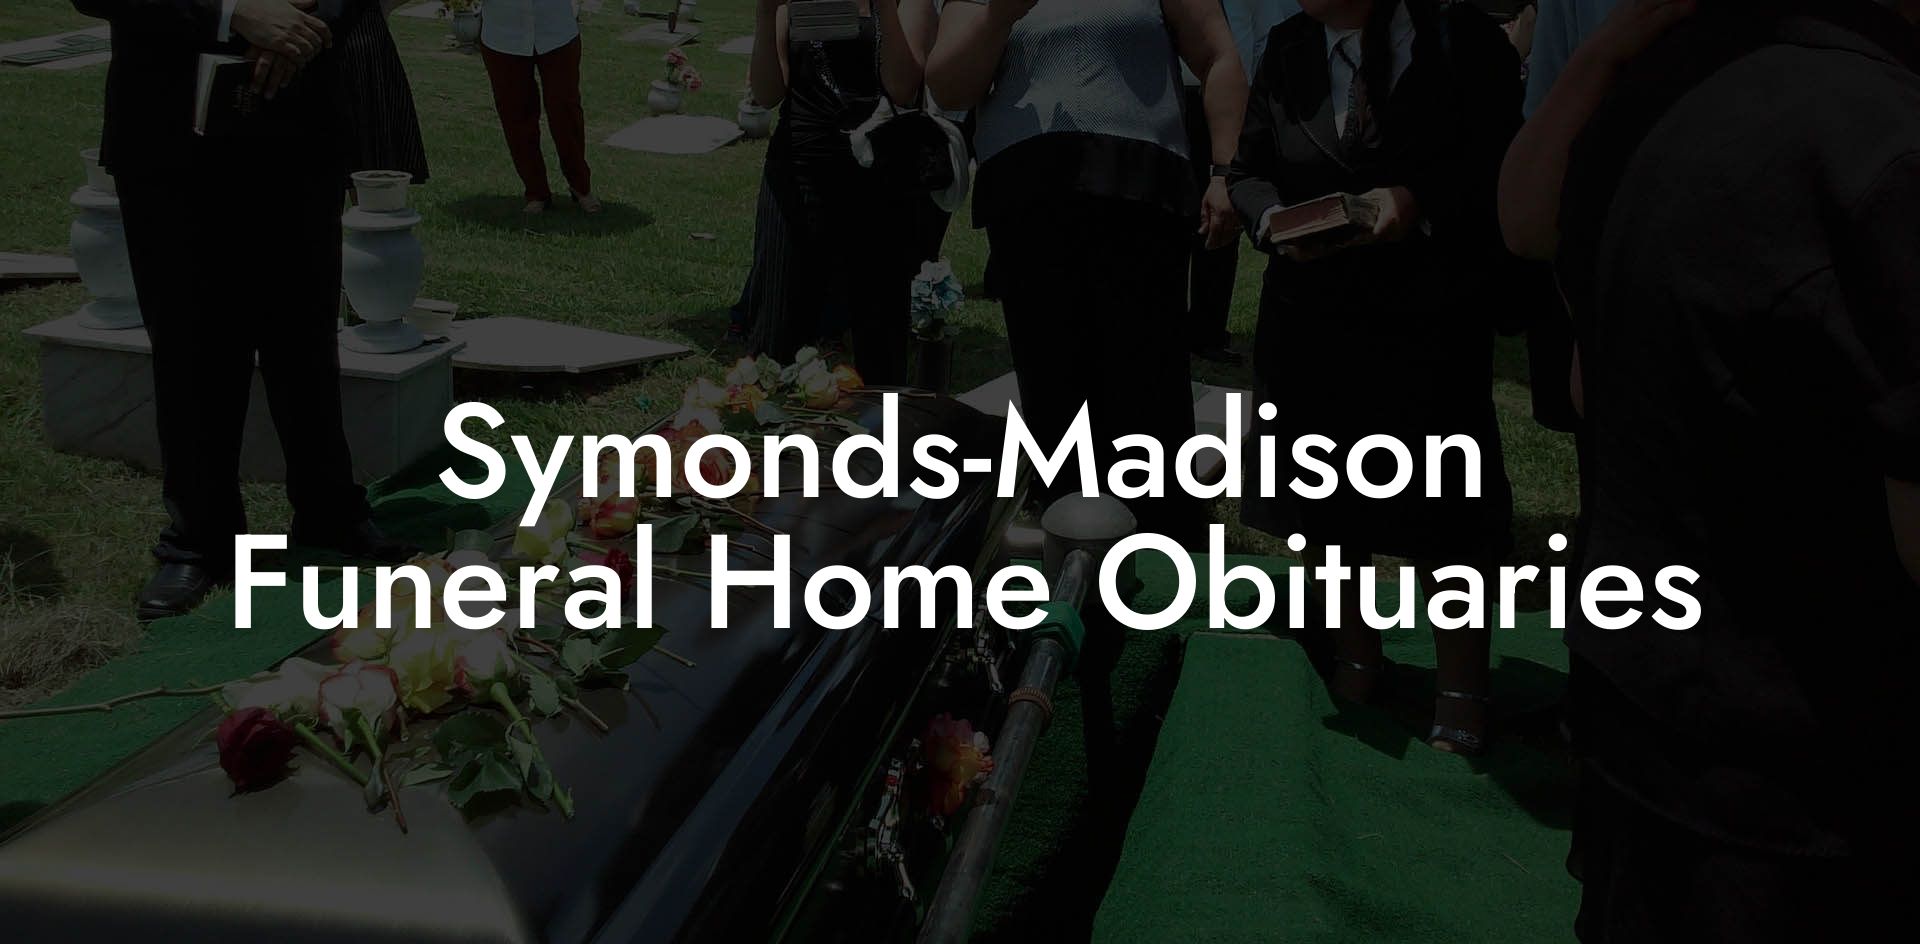 Symonds-Madison Funeral Home Obituaries